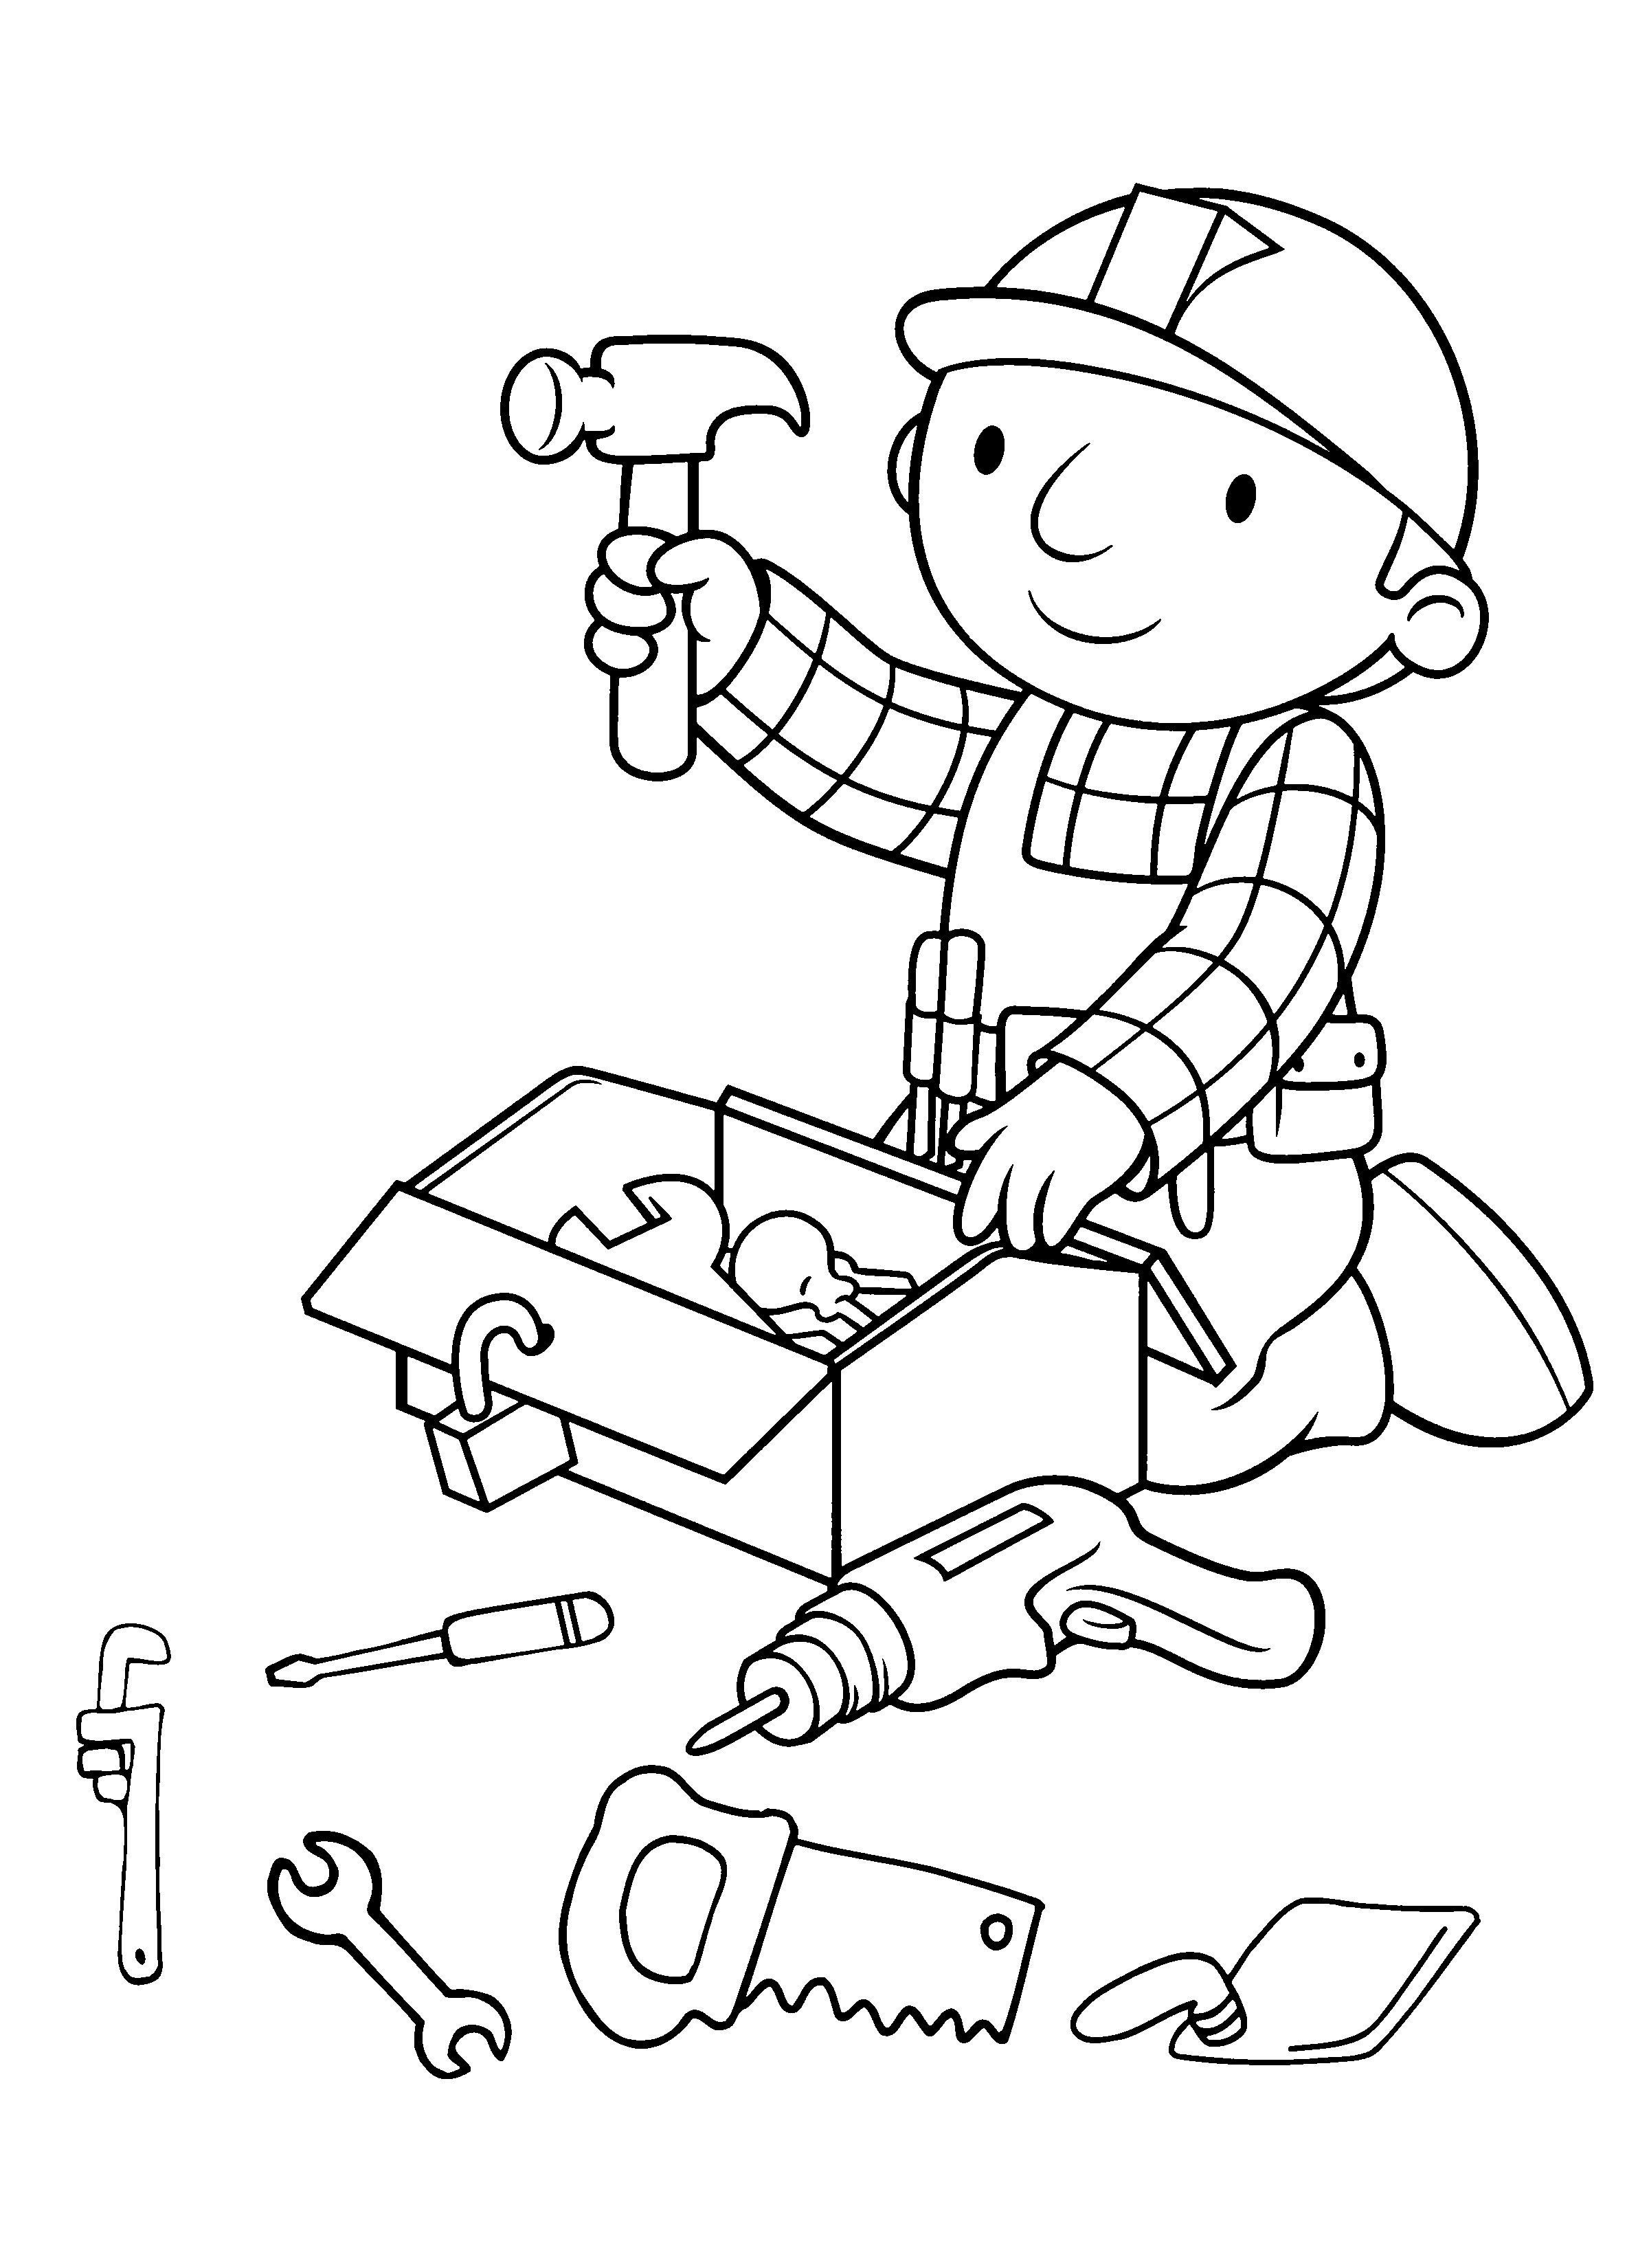 Bob The Builder Team Coloring Pages